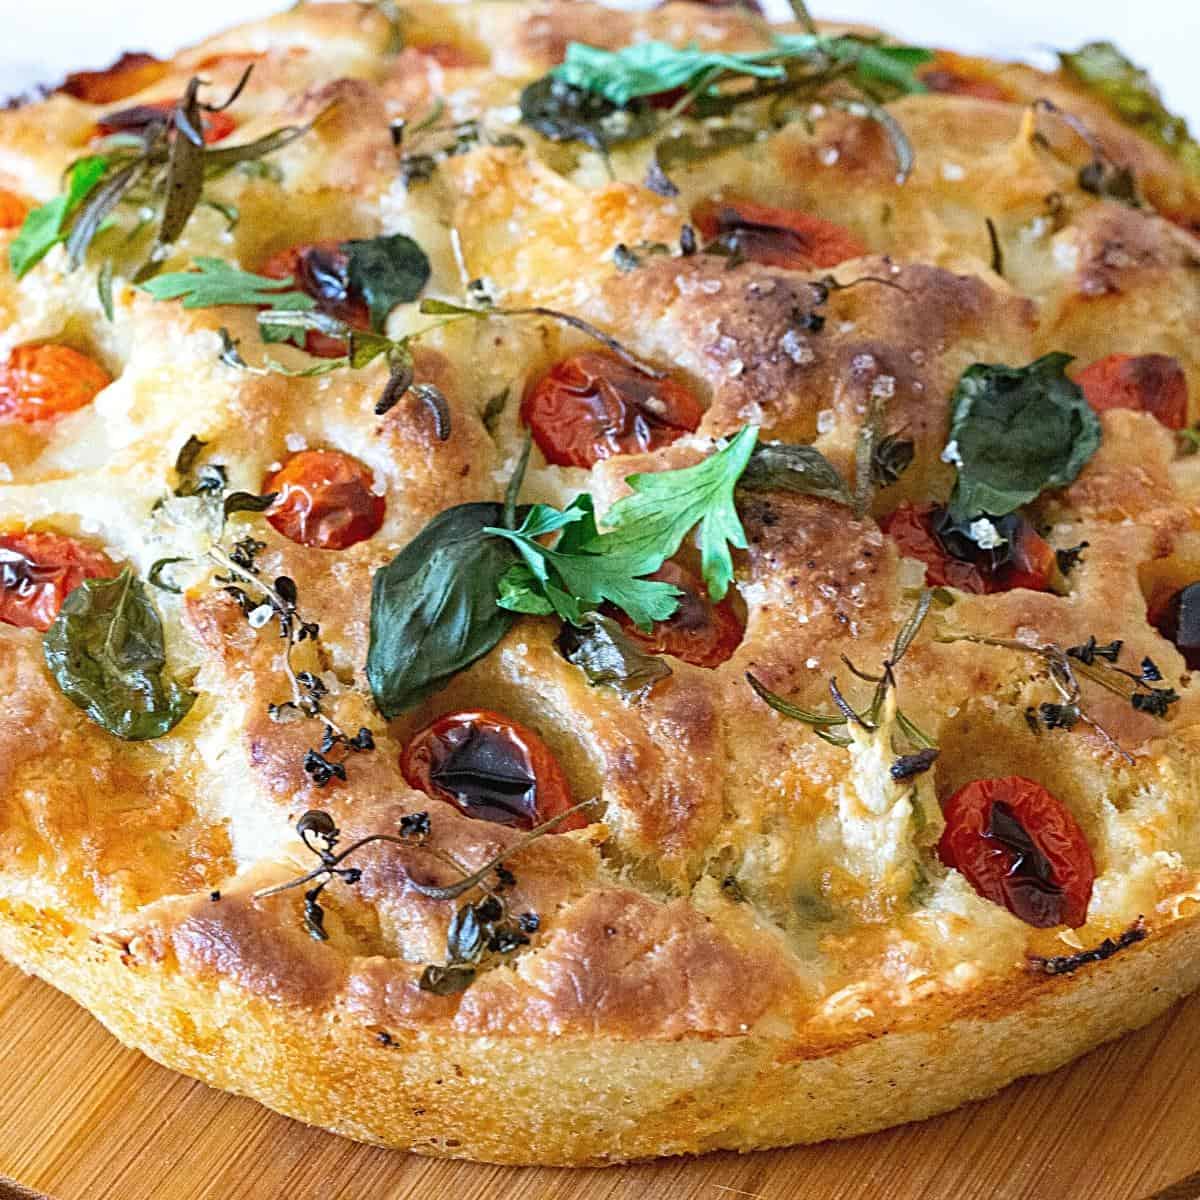 A focaccia baked with cherry tomatoes.